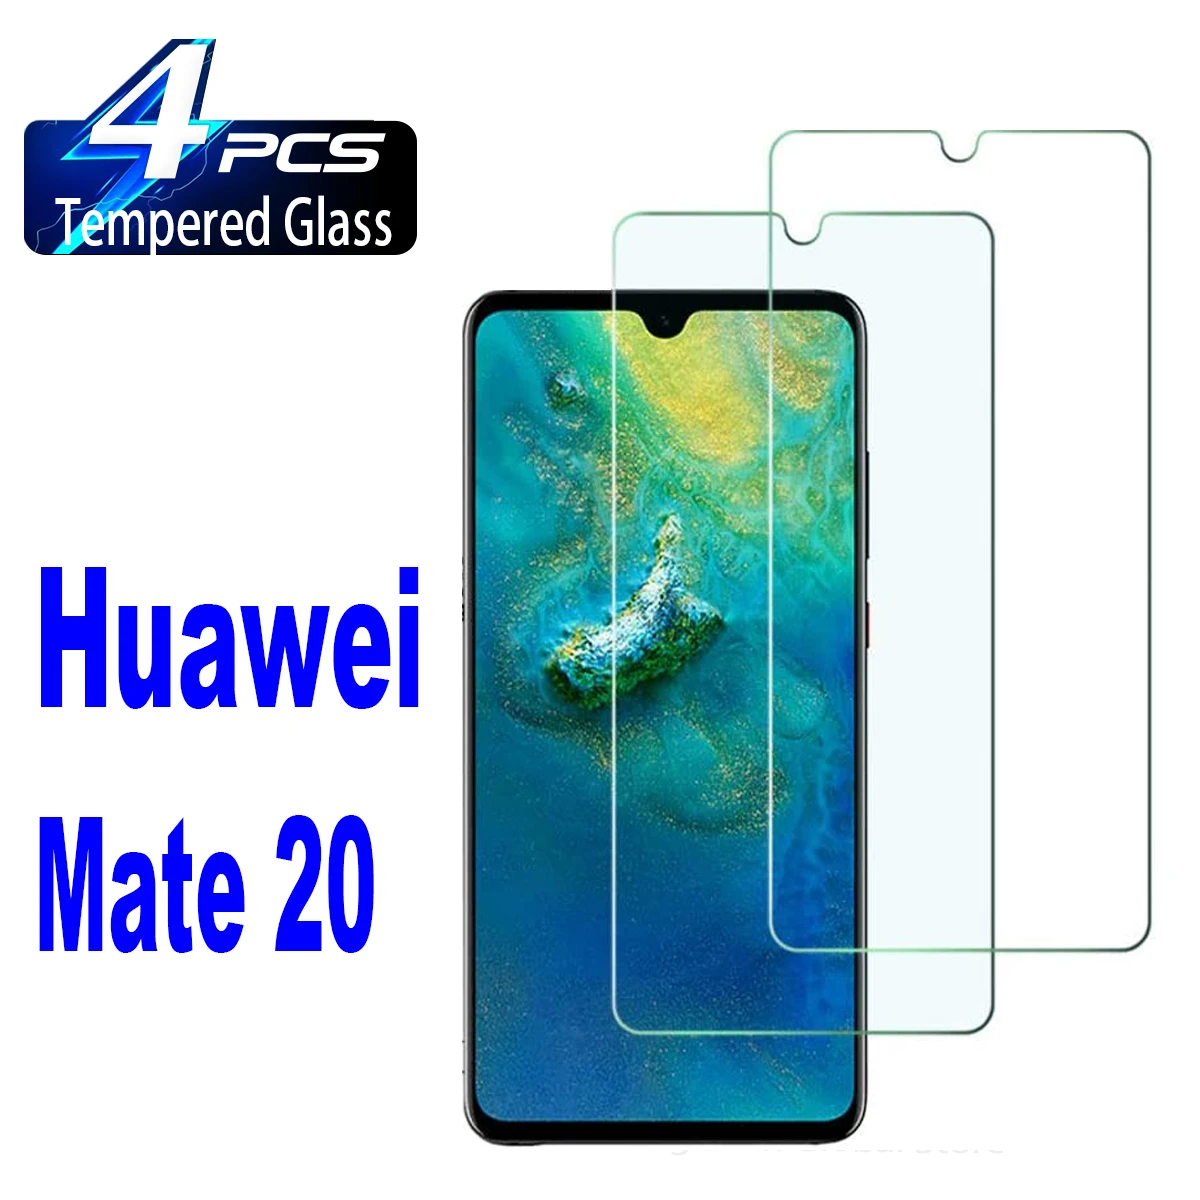 2-4pcs-tempered-glass-for-huawei-mate-20-screen-protector-glass-film